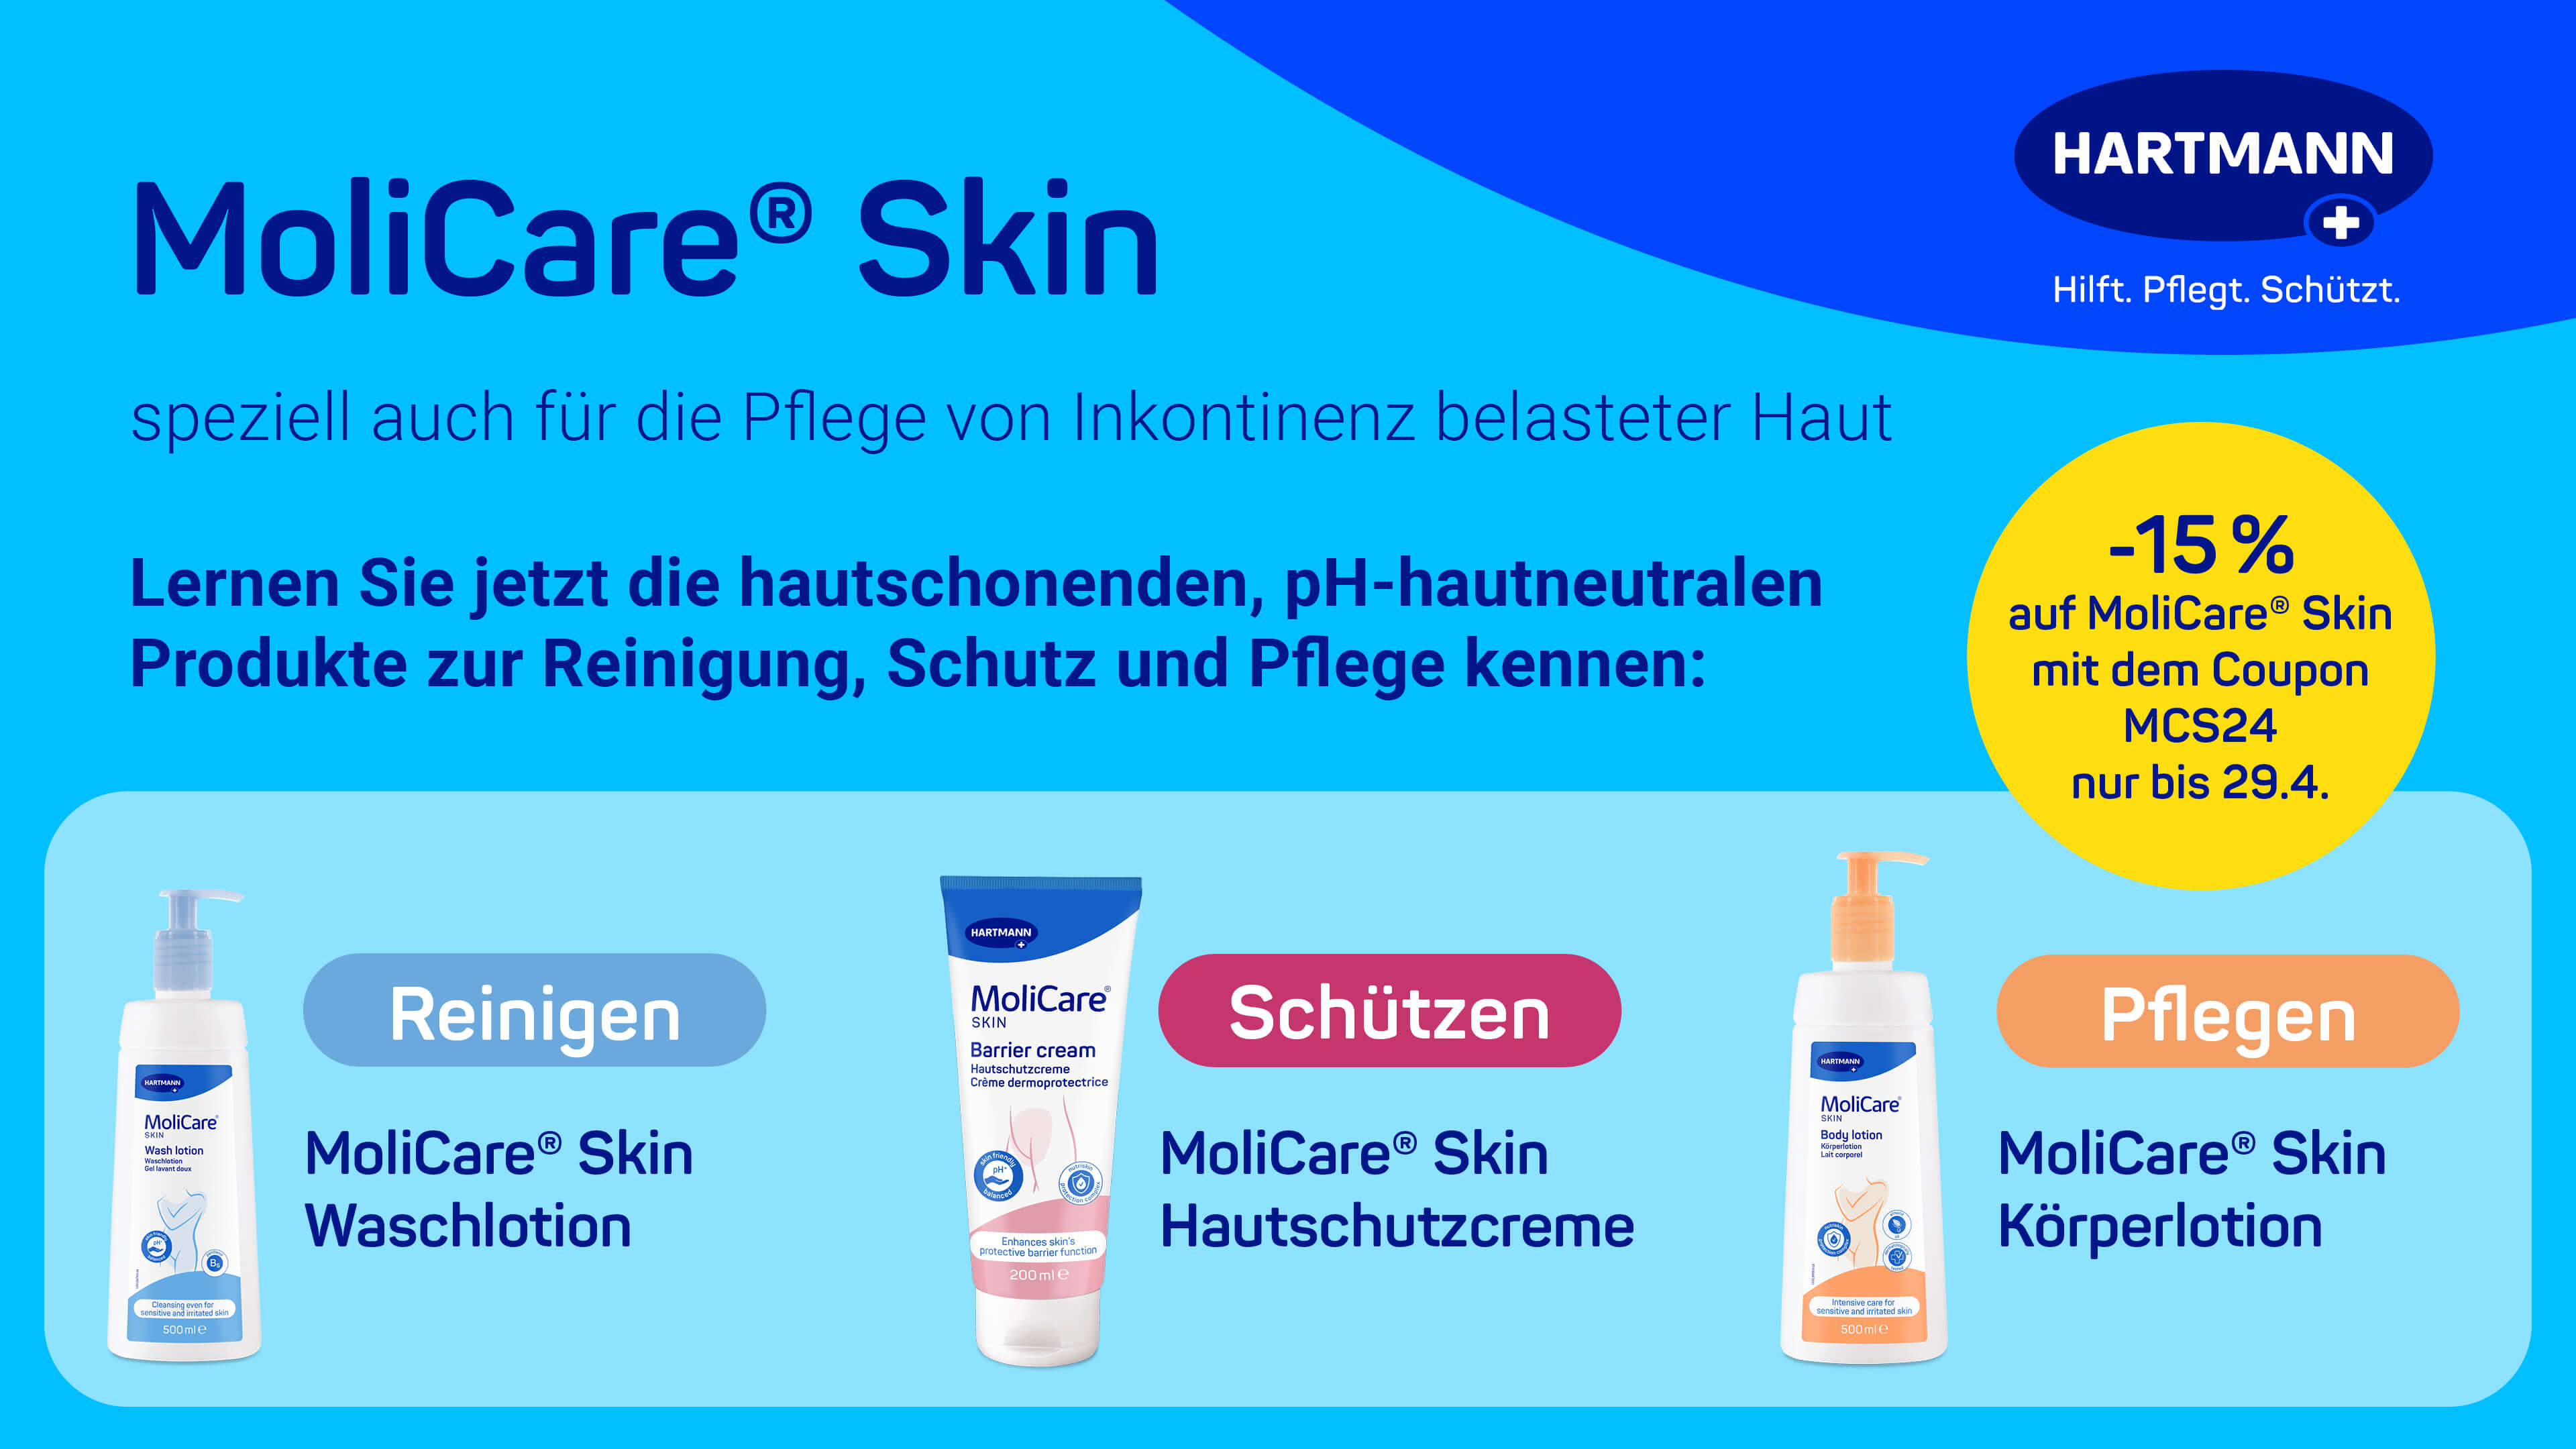 he main text on the image describes the MoliCare® Skin product line, which is specially designed for skin care affected by incontinence. Here are the key details:  Product Line: MoliCare® Skin Purpose: Specially for the care of skin affected by incontinence Products: Reinigen: MoliCare® Skin Washlotion Schützen: MoliCare® Skin Hautschutzcreme Pflegen: MoliCare® Skin Körperlotion Offer: -15% discount with coupon code MCS24 until April 29th The image also features the HARTMANN logo, indicating their association with the products.